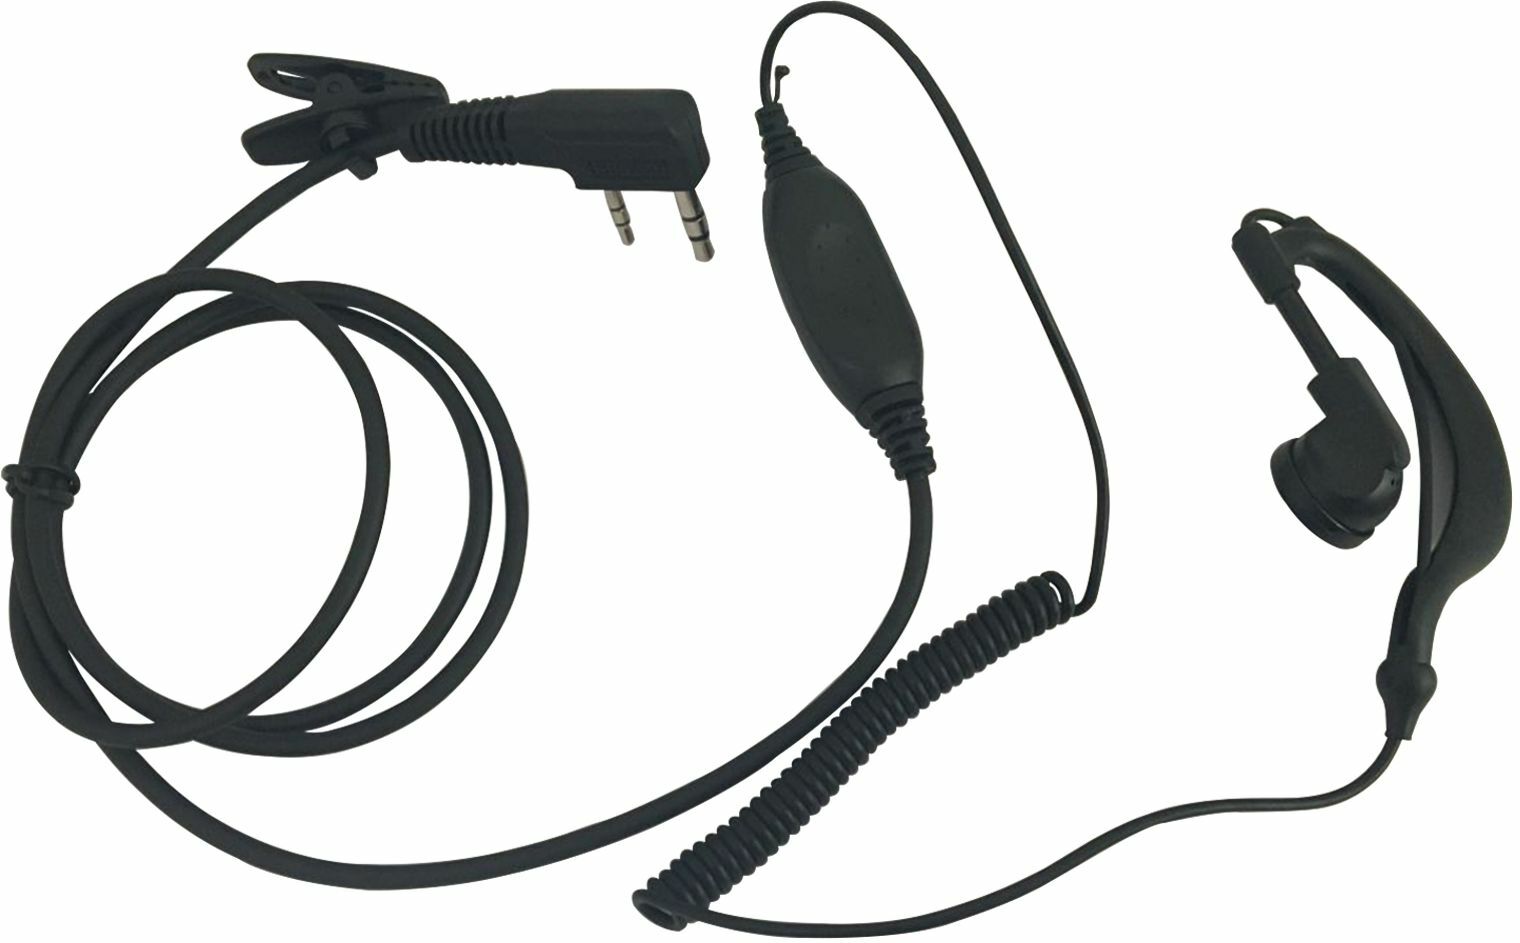 Power Acoustics Hs 06 - Headset microphone - Main picture